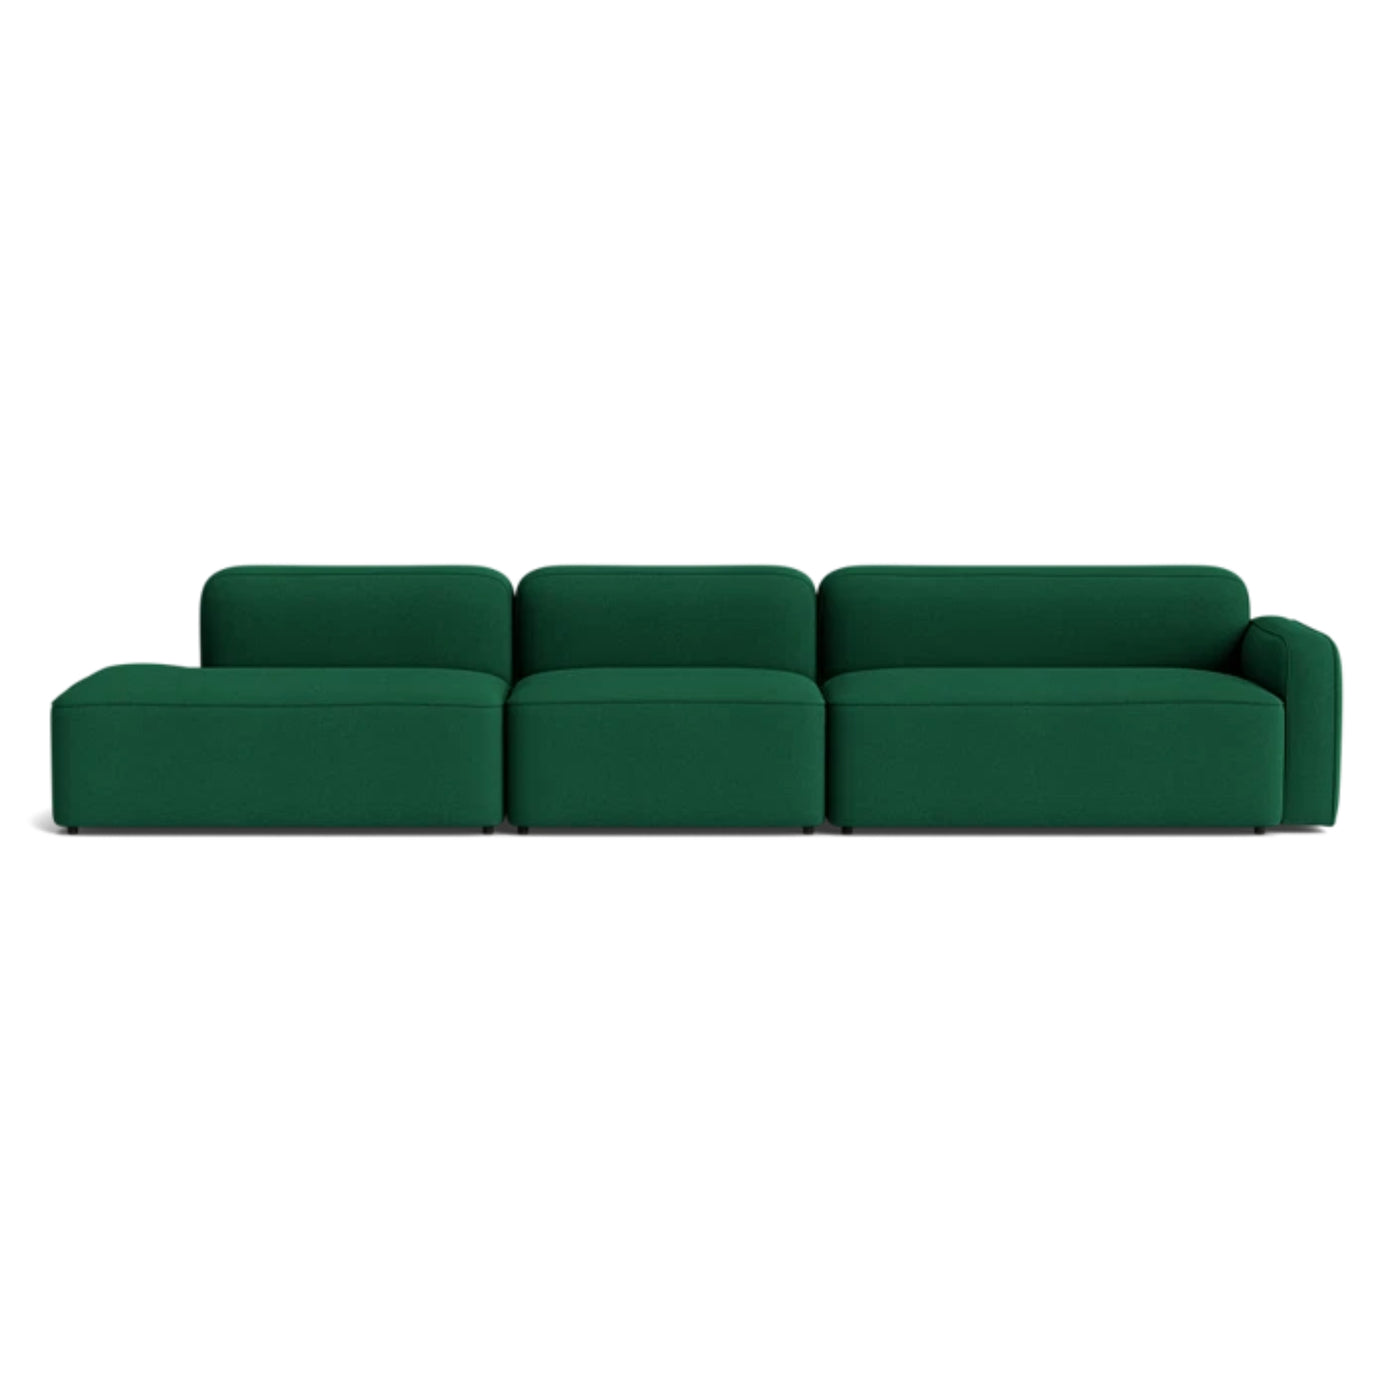 Normann Copenhagen Rope 3 Seater Modular Sofa. Made to order at someday designs. #colour_hallingdal-944